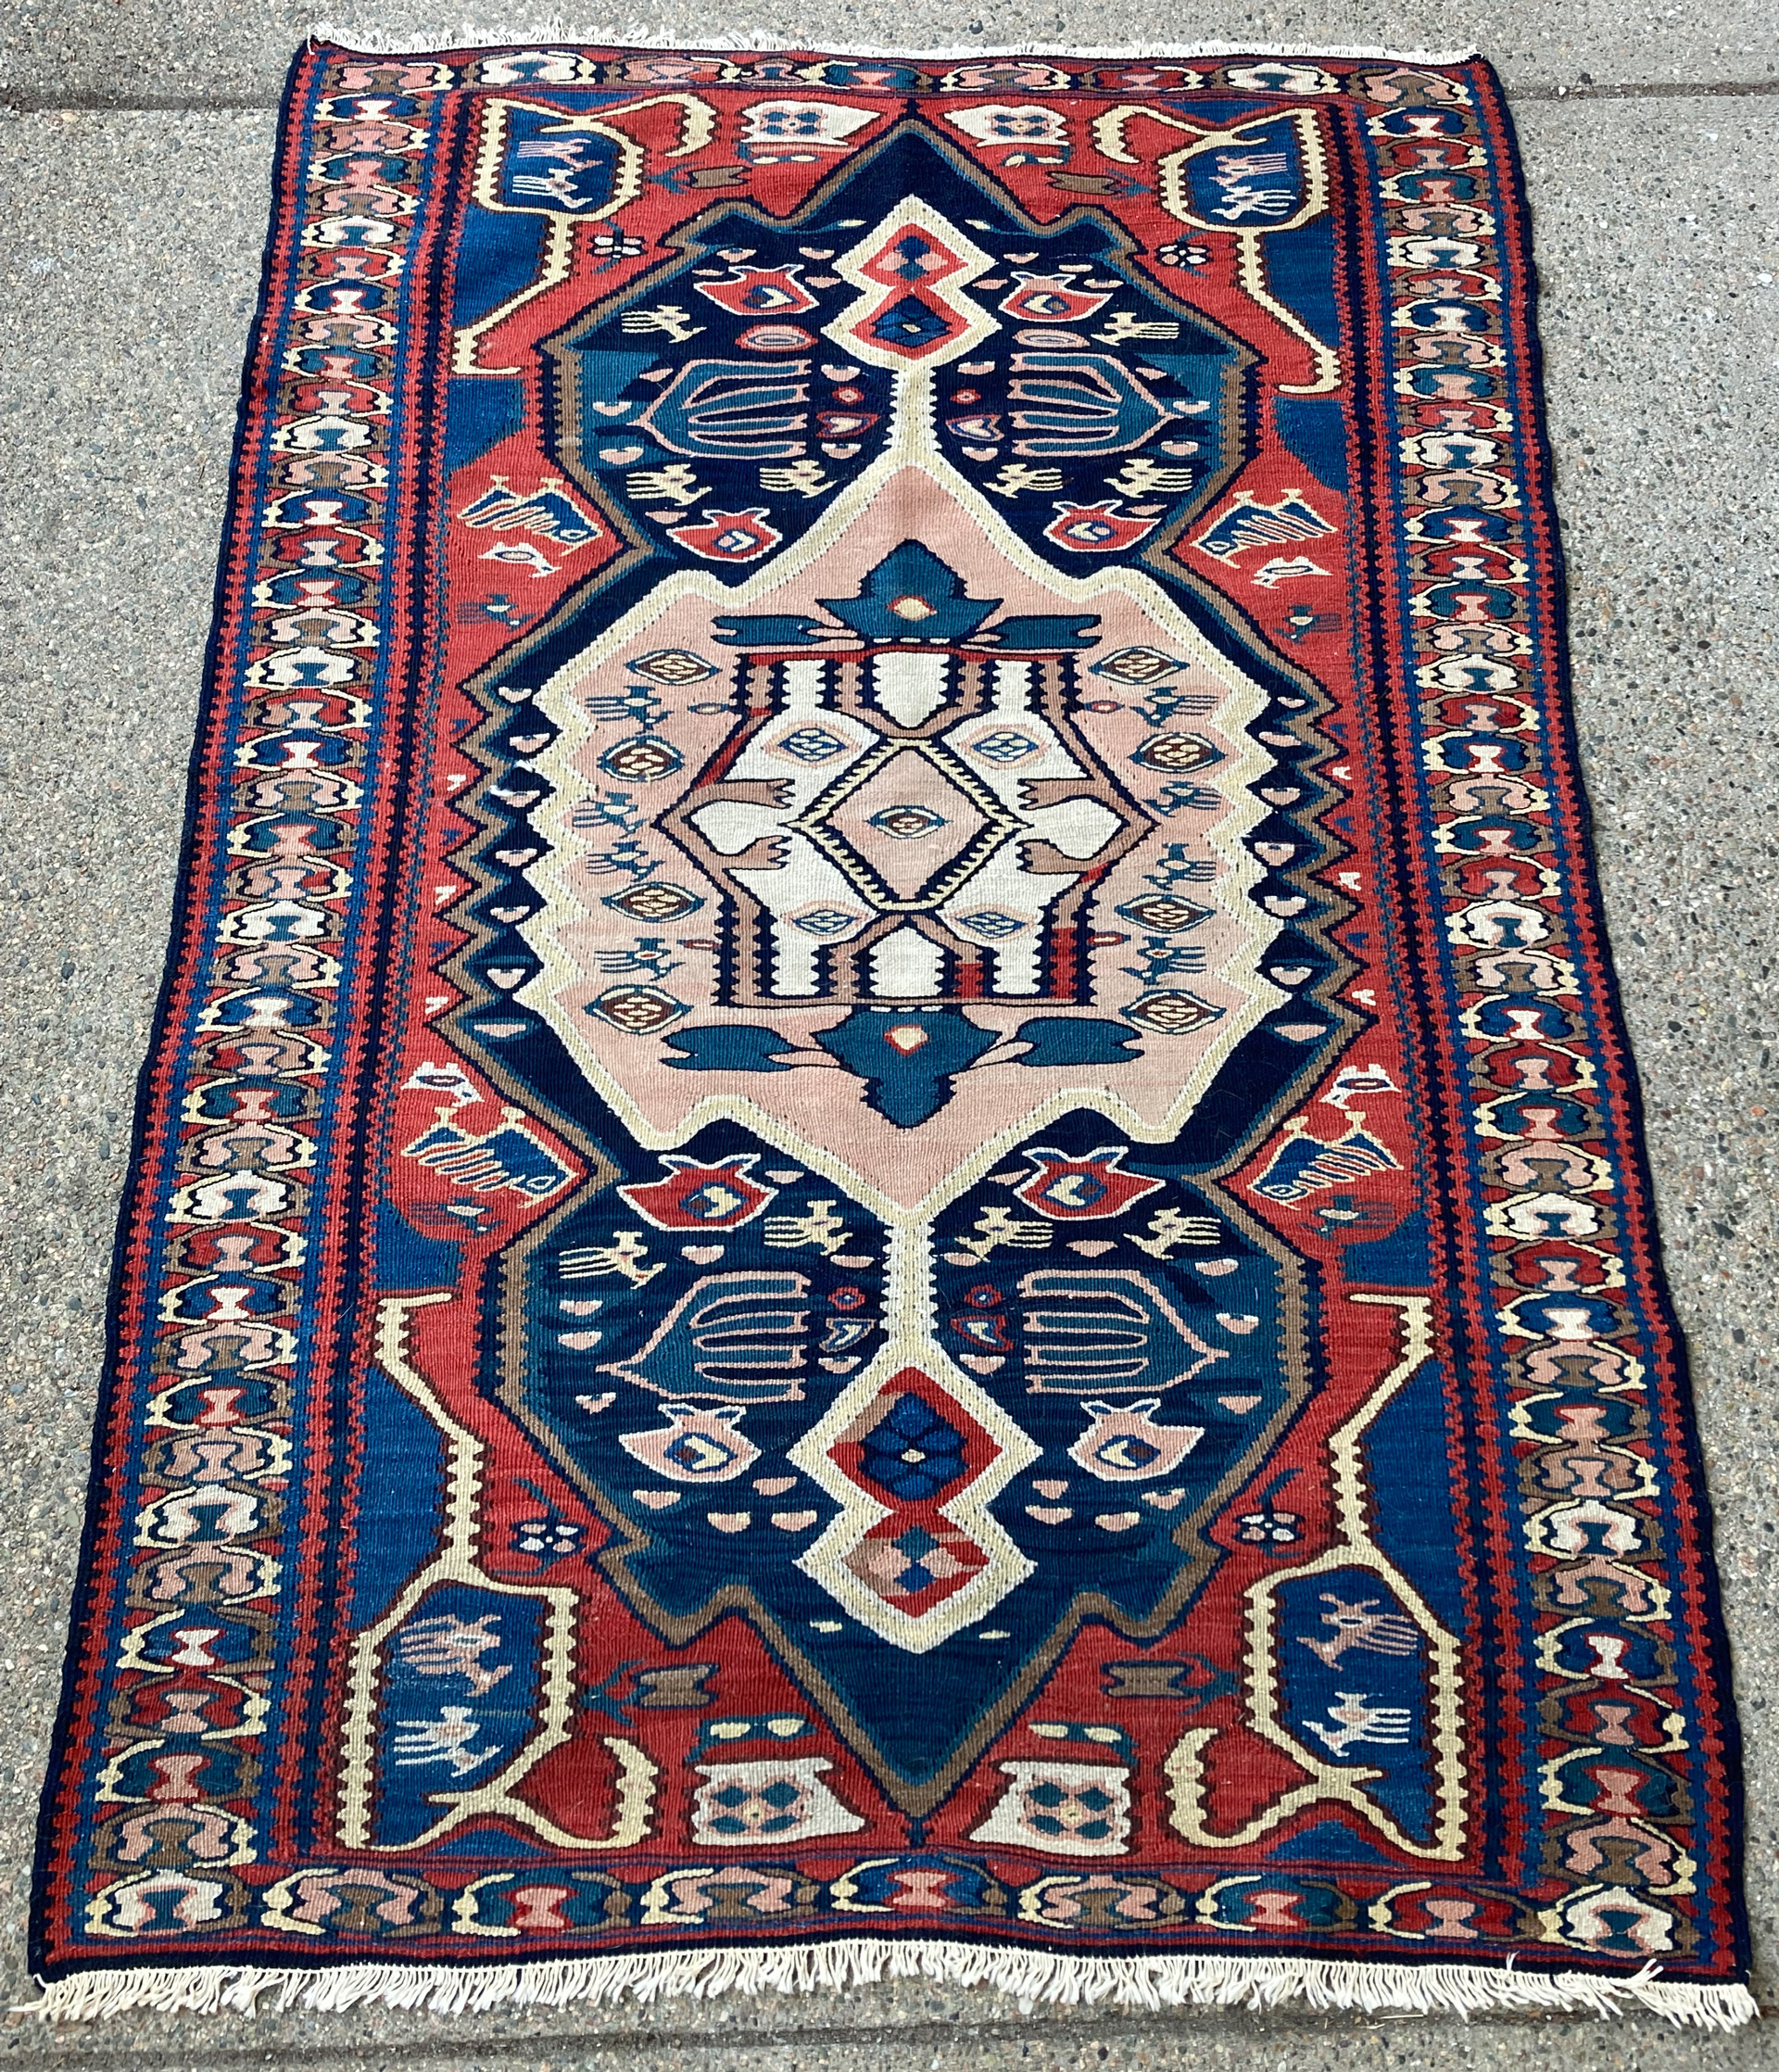 The lighter side of an antique Persian Bidjar flat woven kilim rug, probably faded by exposure to the sun but resulting in a softer, still beautiful palette, Douglas Stock Gallery, antique flat woven kilim rugs Boston,MA area New England